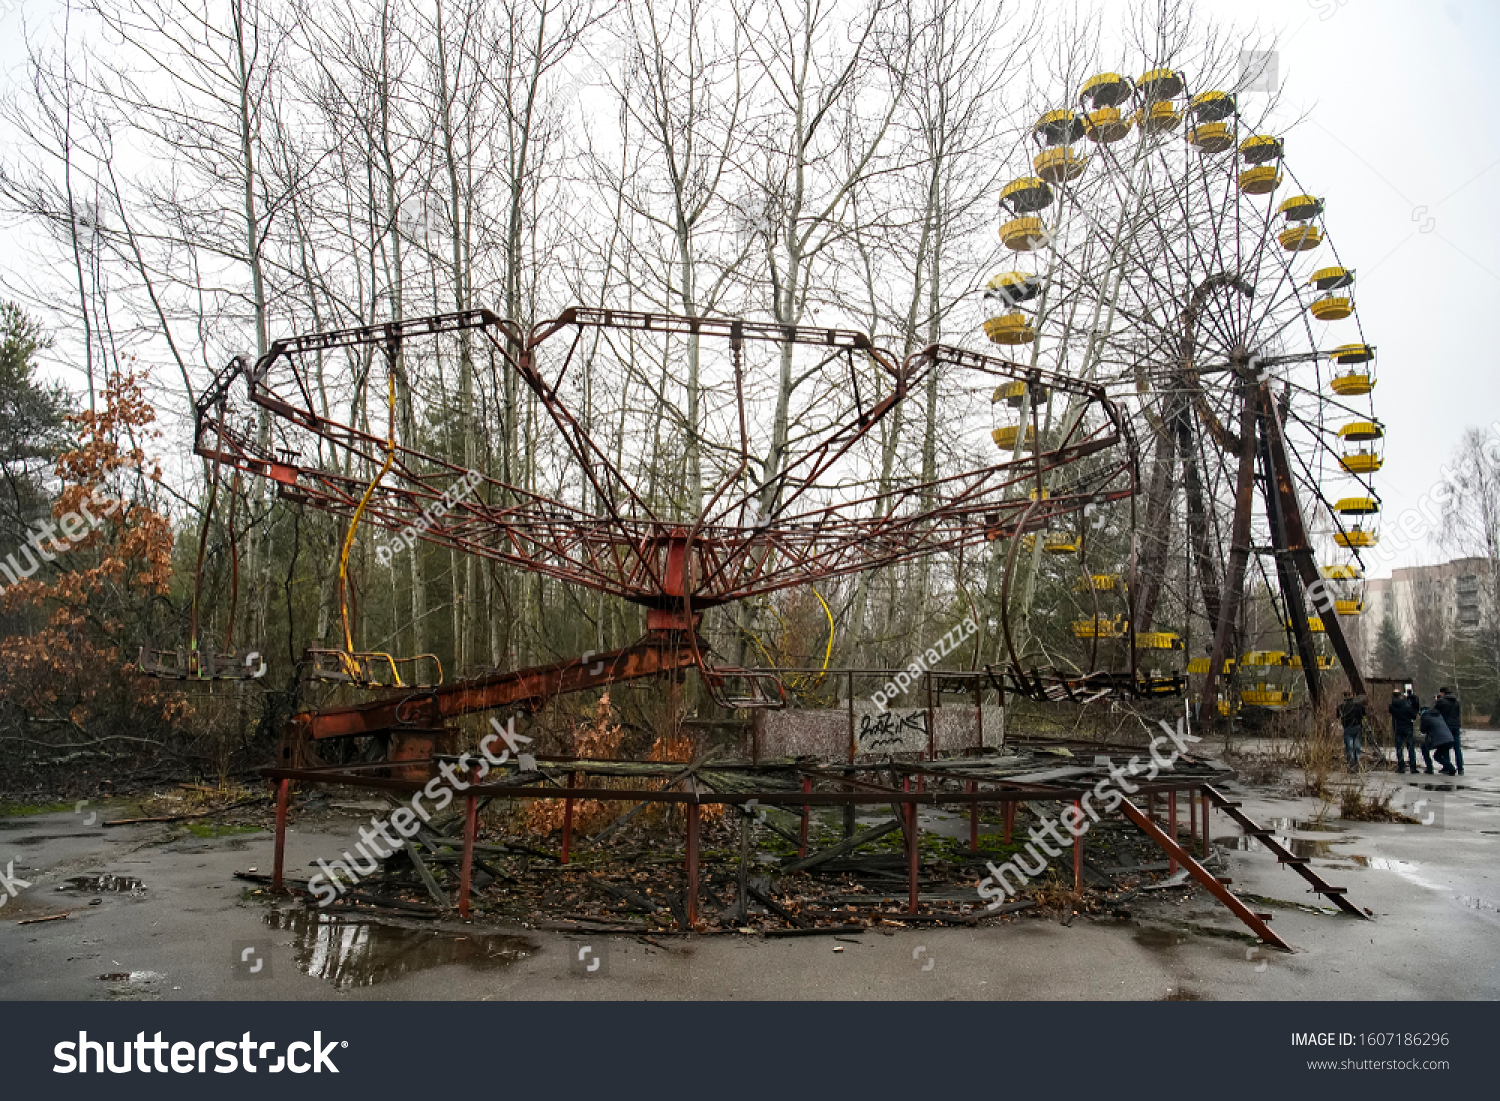 Abandoned amusement park in ghost town Prypiat. Overgrown trees and collapsing buildings in Priryat, Chornobyl exclusion zone. December 2019
 #1607186296